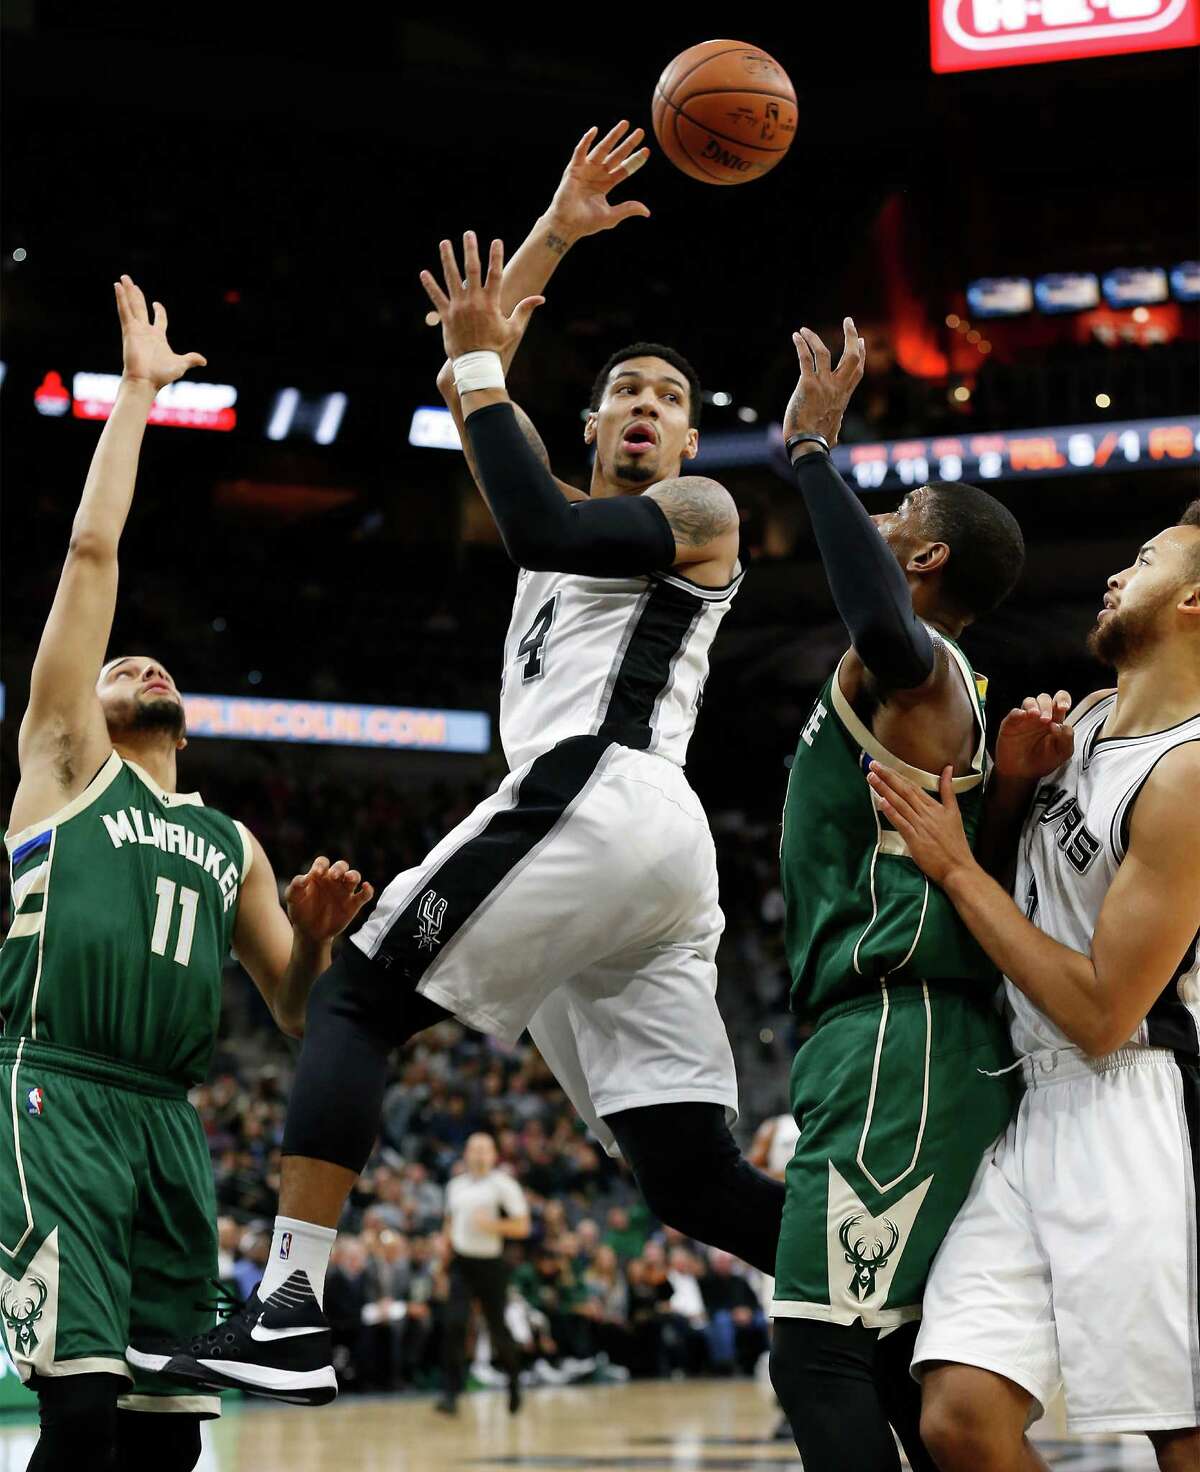 Spurs' Danny Green (14) makes a pass between the Milwaukee Bucks' Tyler Ennis (11) and O.J. Mayo (03) at the AT&T Center on Wednesday, Dec. 2, 2015. (Kin Man Hui/San Antonio Express-News)